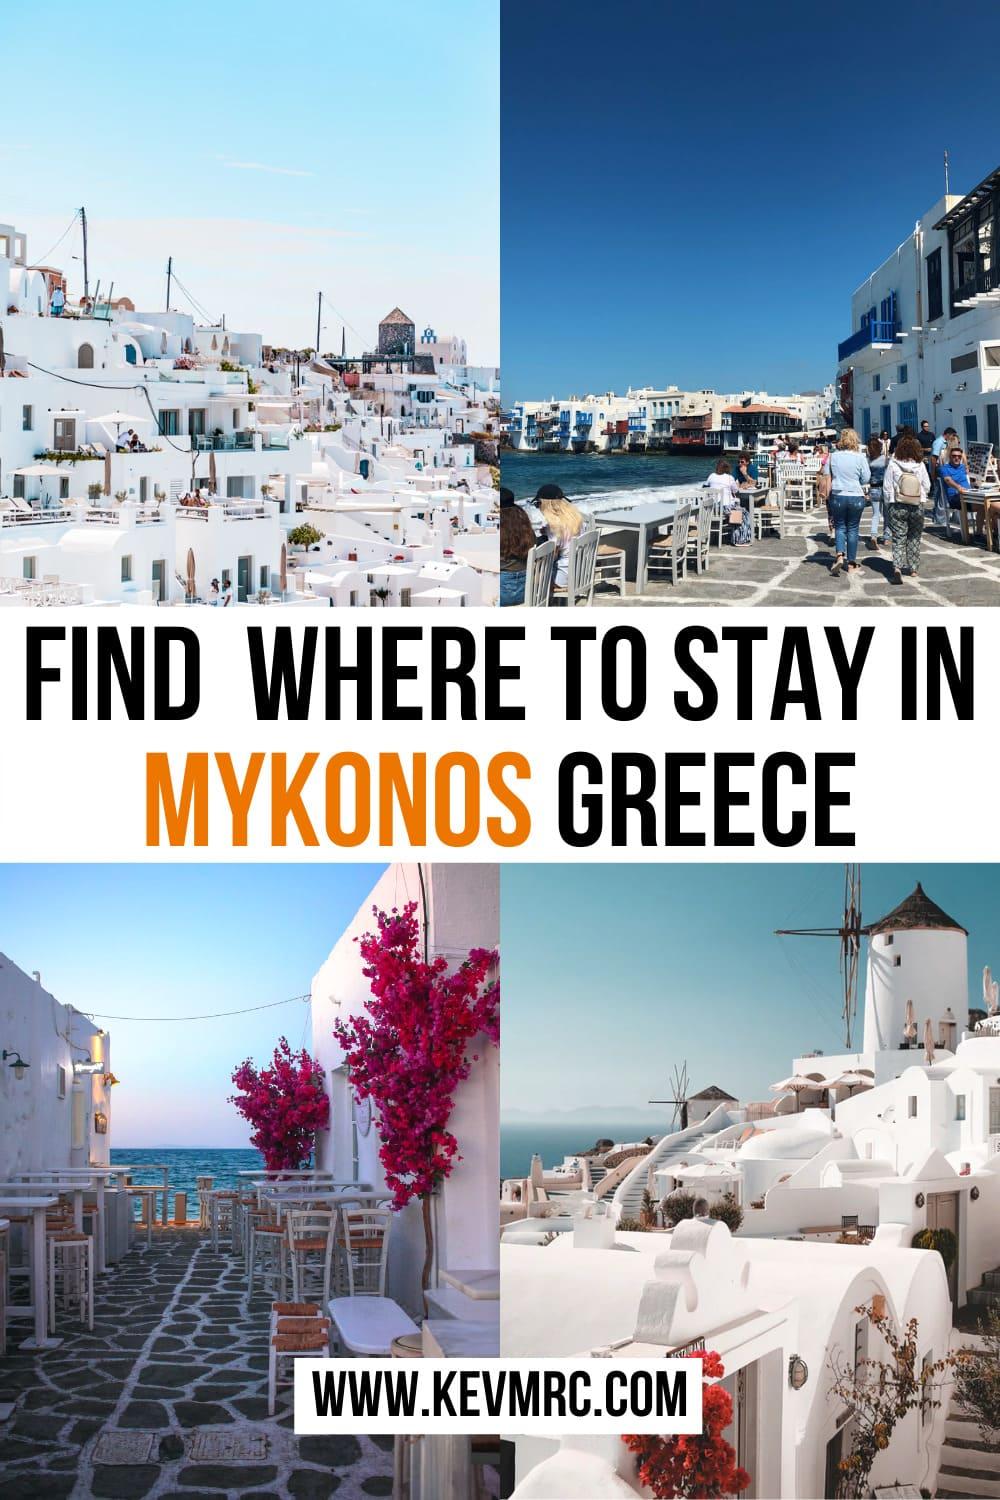 Visiting Mykonos is all about giving yourself a relaxing and enjoyable time. Whether it's sunbathing on the golden beaches or strolling along the iconic white streets or windmills, Mykonos offers an idyllic setting to have an unforgettable vacation.With everything going on in Mykonos, it's important to find the right area where to stay according to your own travel style. where to stay in mykonos greece | mykonos island beautiful places | mykonos town hotels | best mykonos hotels 